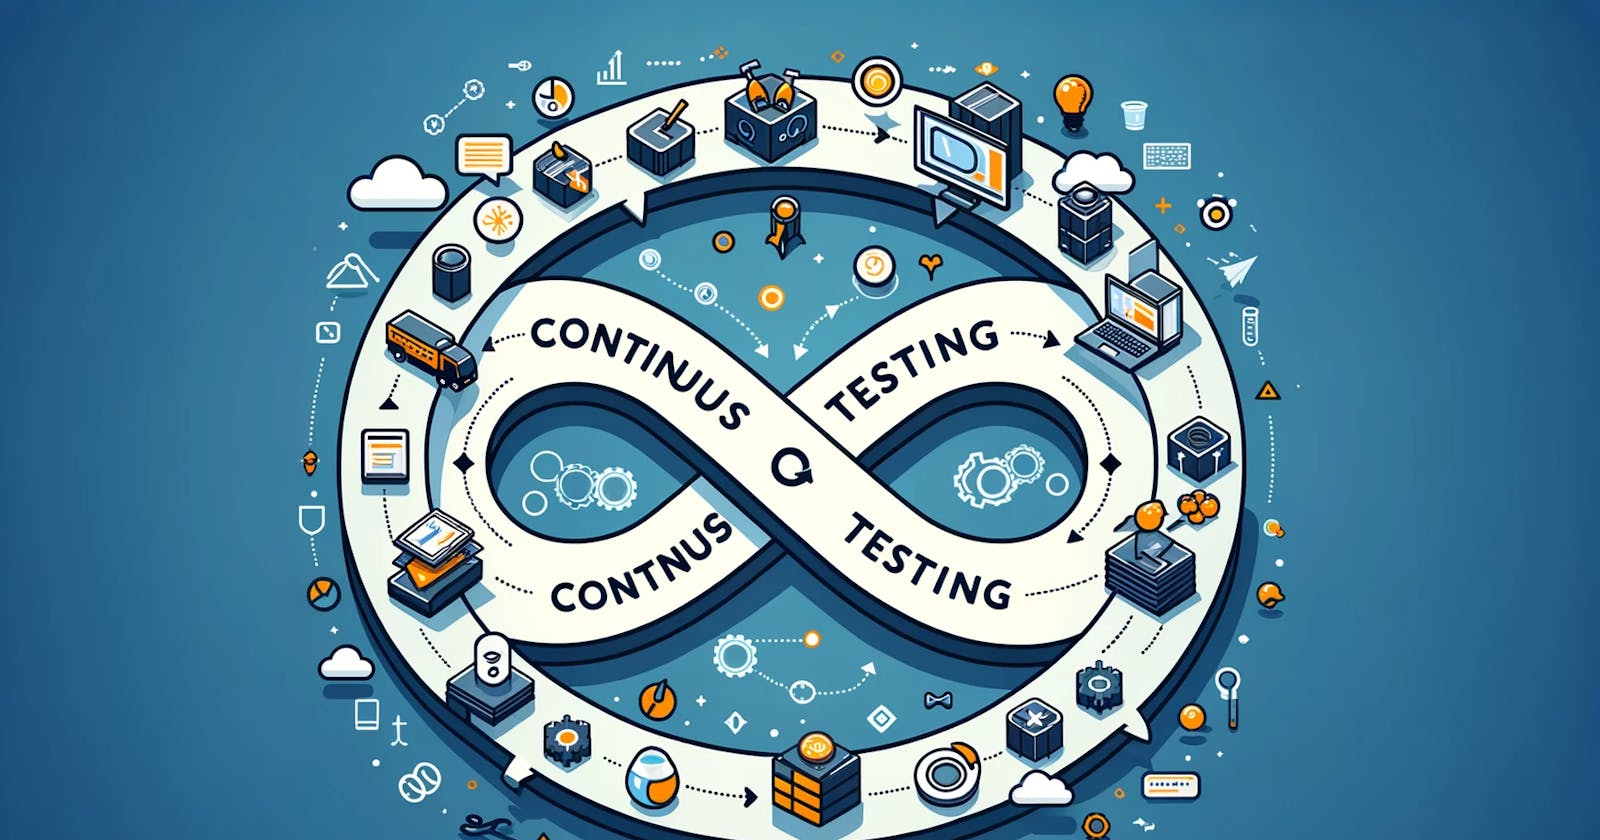 Improving Code Quality and Accelerating Development: The Continuous Testing Way